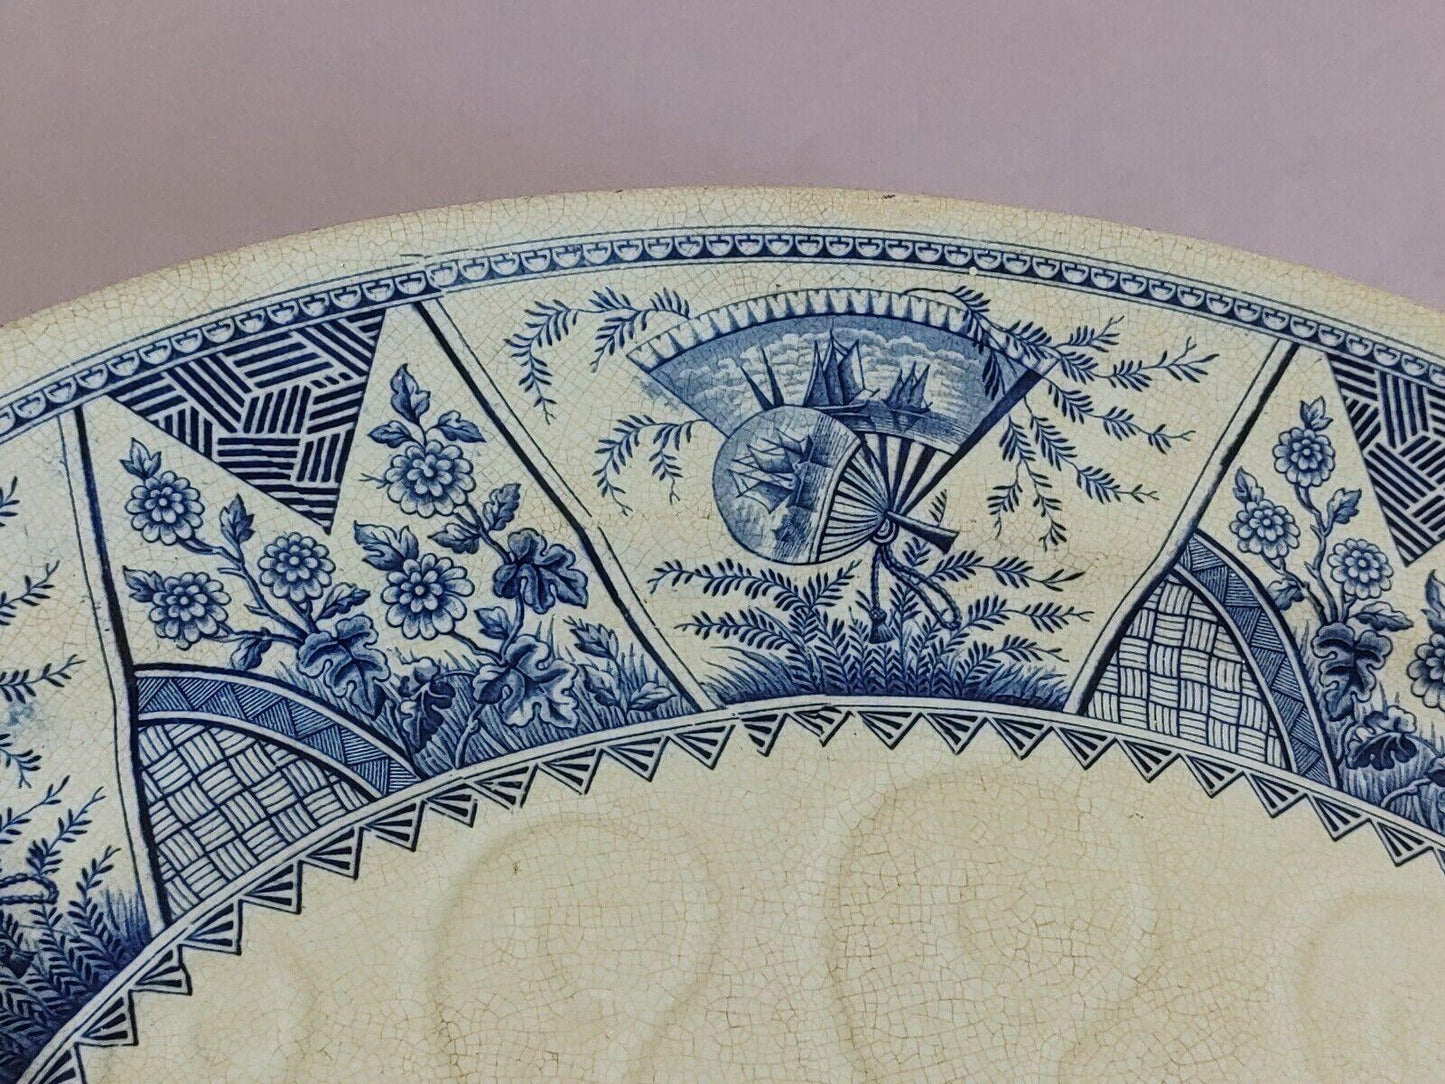 Antique 19th C. Old Hall Pottery Aestheticism Blue White Ceramic Meat Plate 54cm - Tommy's Treasure